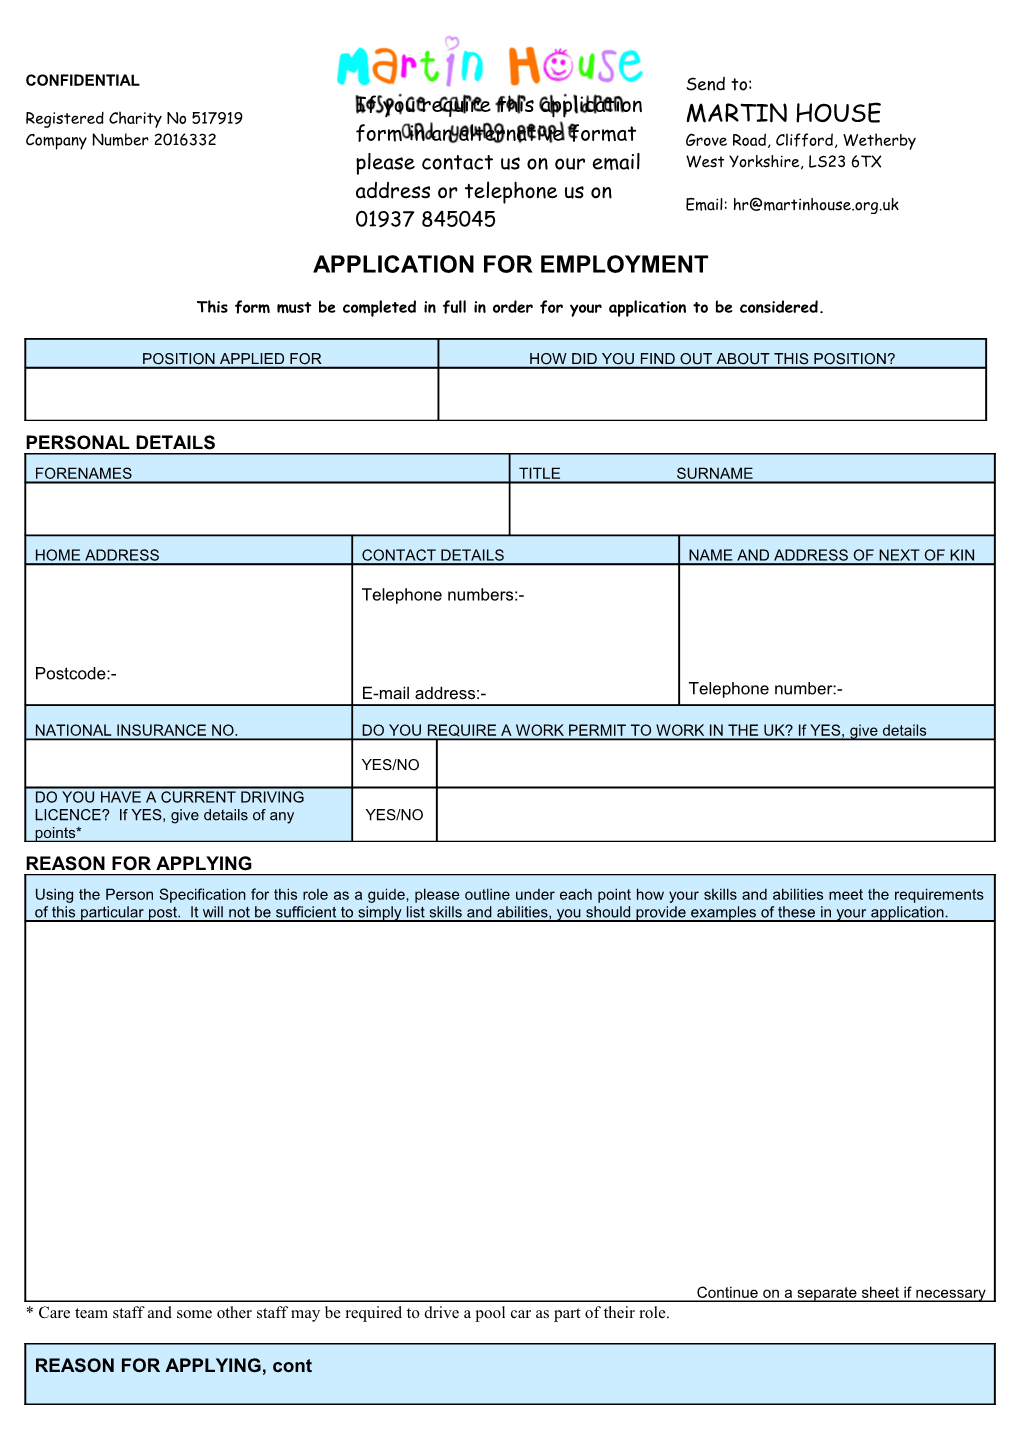 This Form Must Be Completed in Full in Order for Your Application to Be Considered